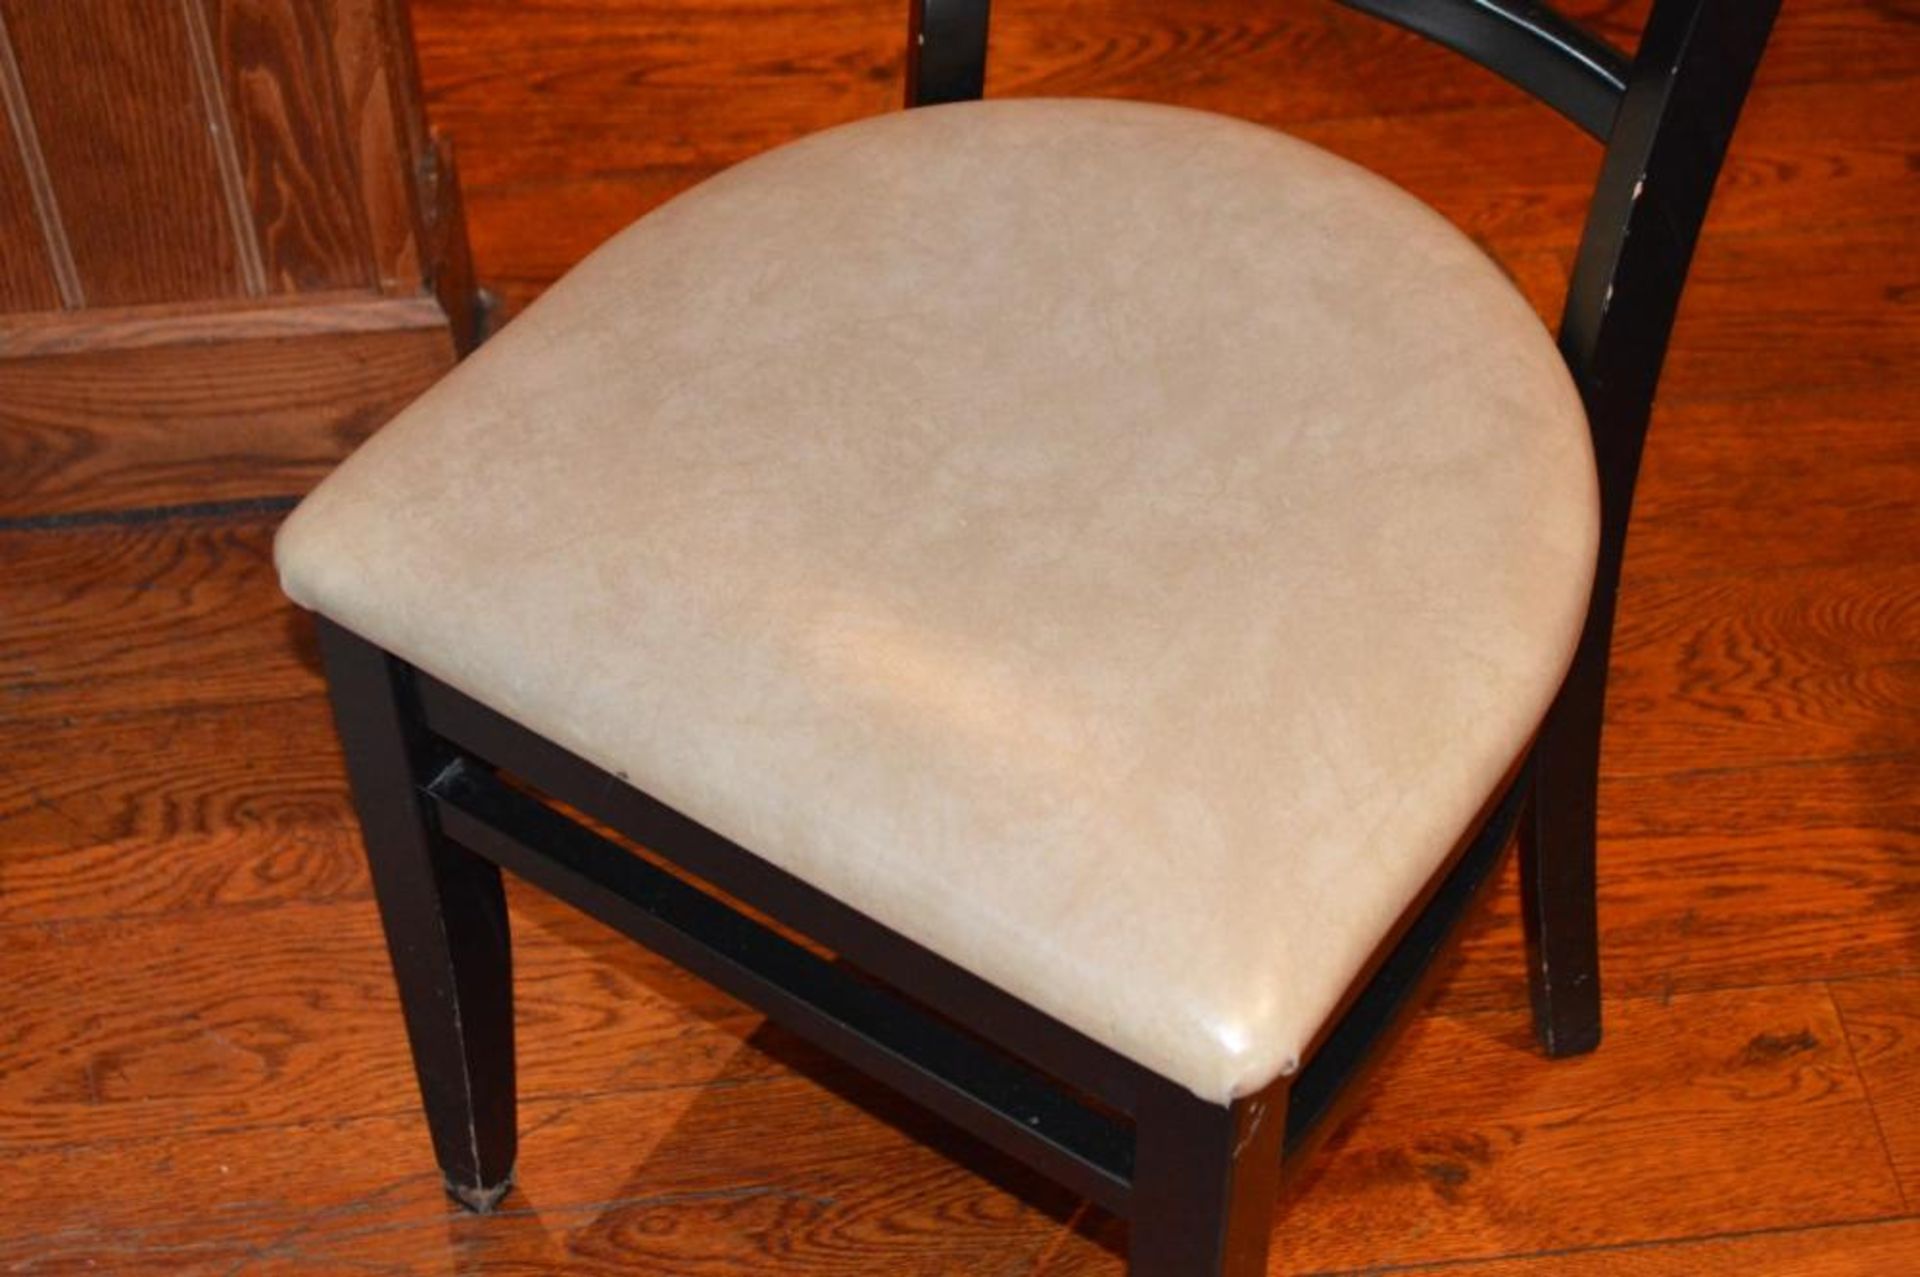 15 x Ladderback Wooden Dining Chairs With Black Finish and Cream Faux Leather Seat Pads - H85 x W45 - Image 3 of 3